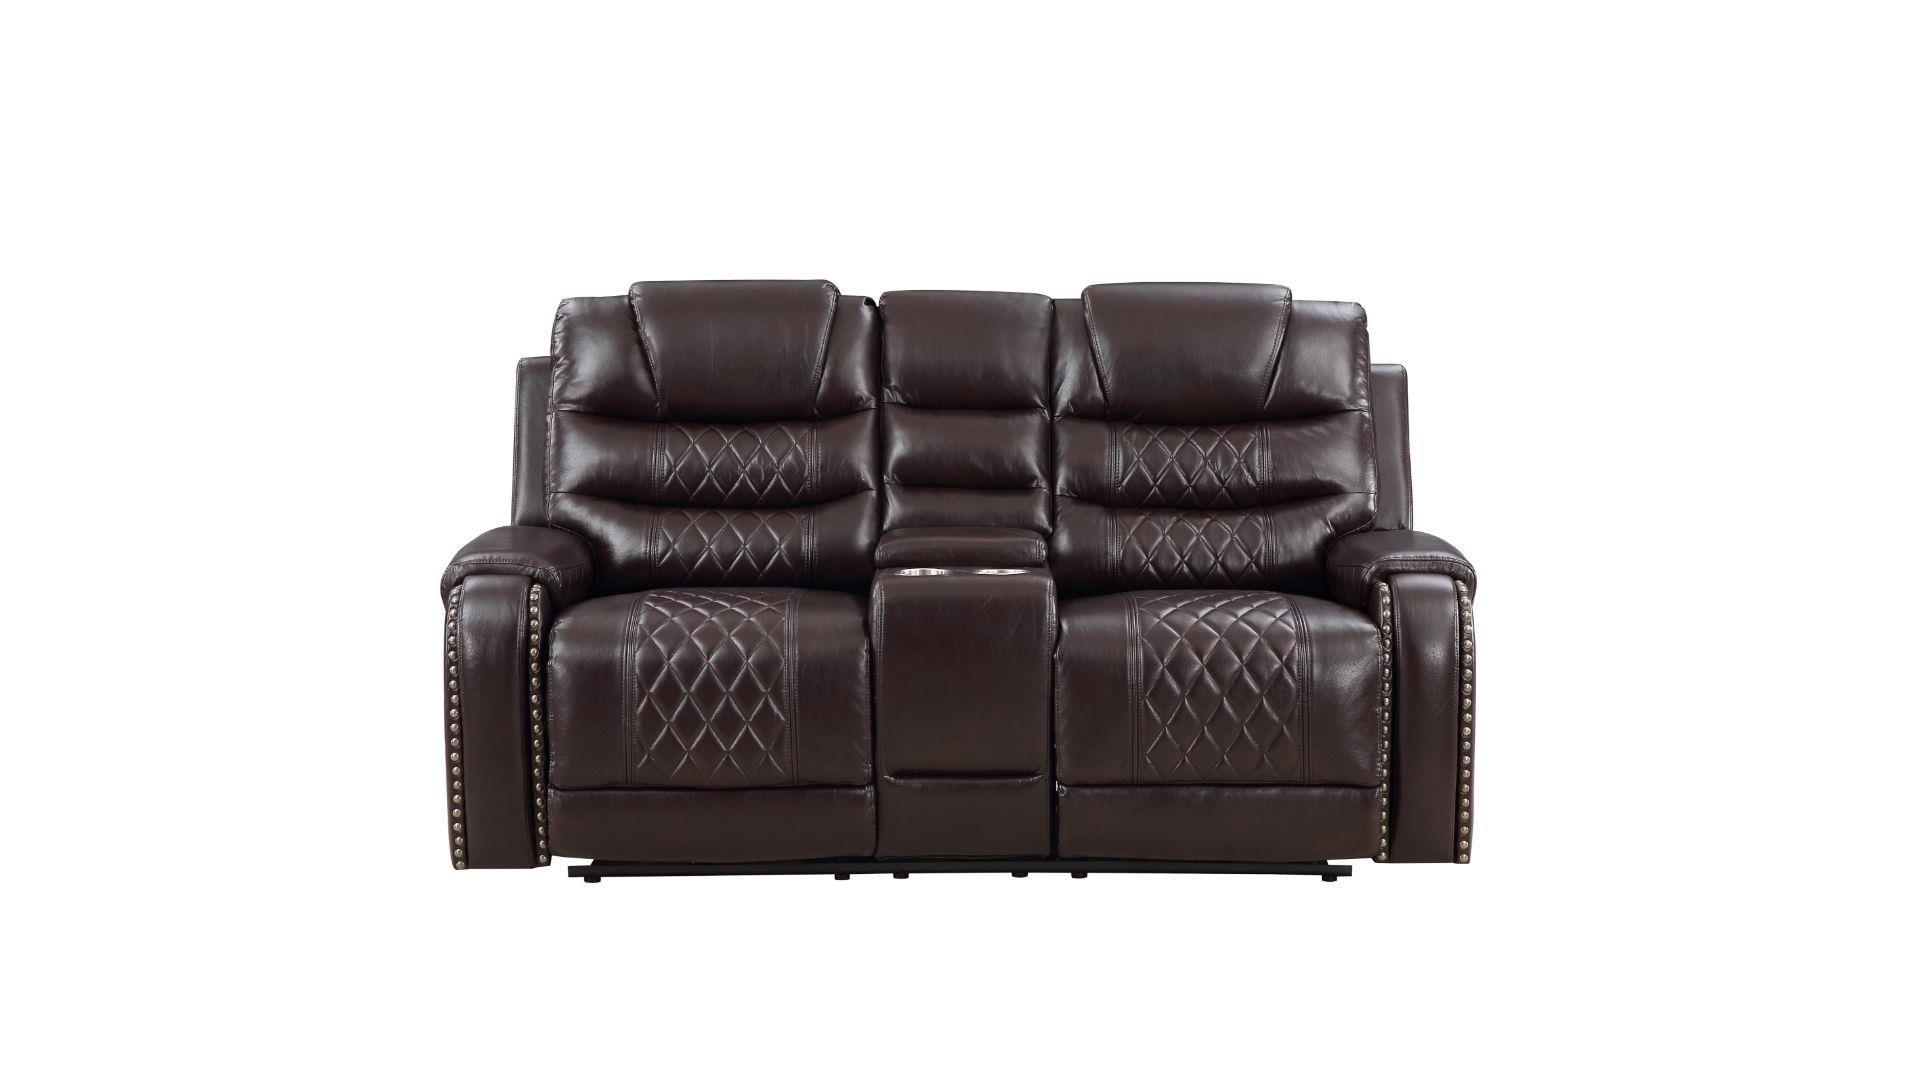 Contemporary, Modern Recliner Loveseat TENNESSEE-BR TENNESSEE-BR-L in Espresso Eco Leather